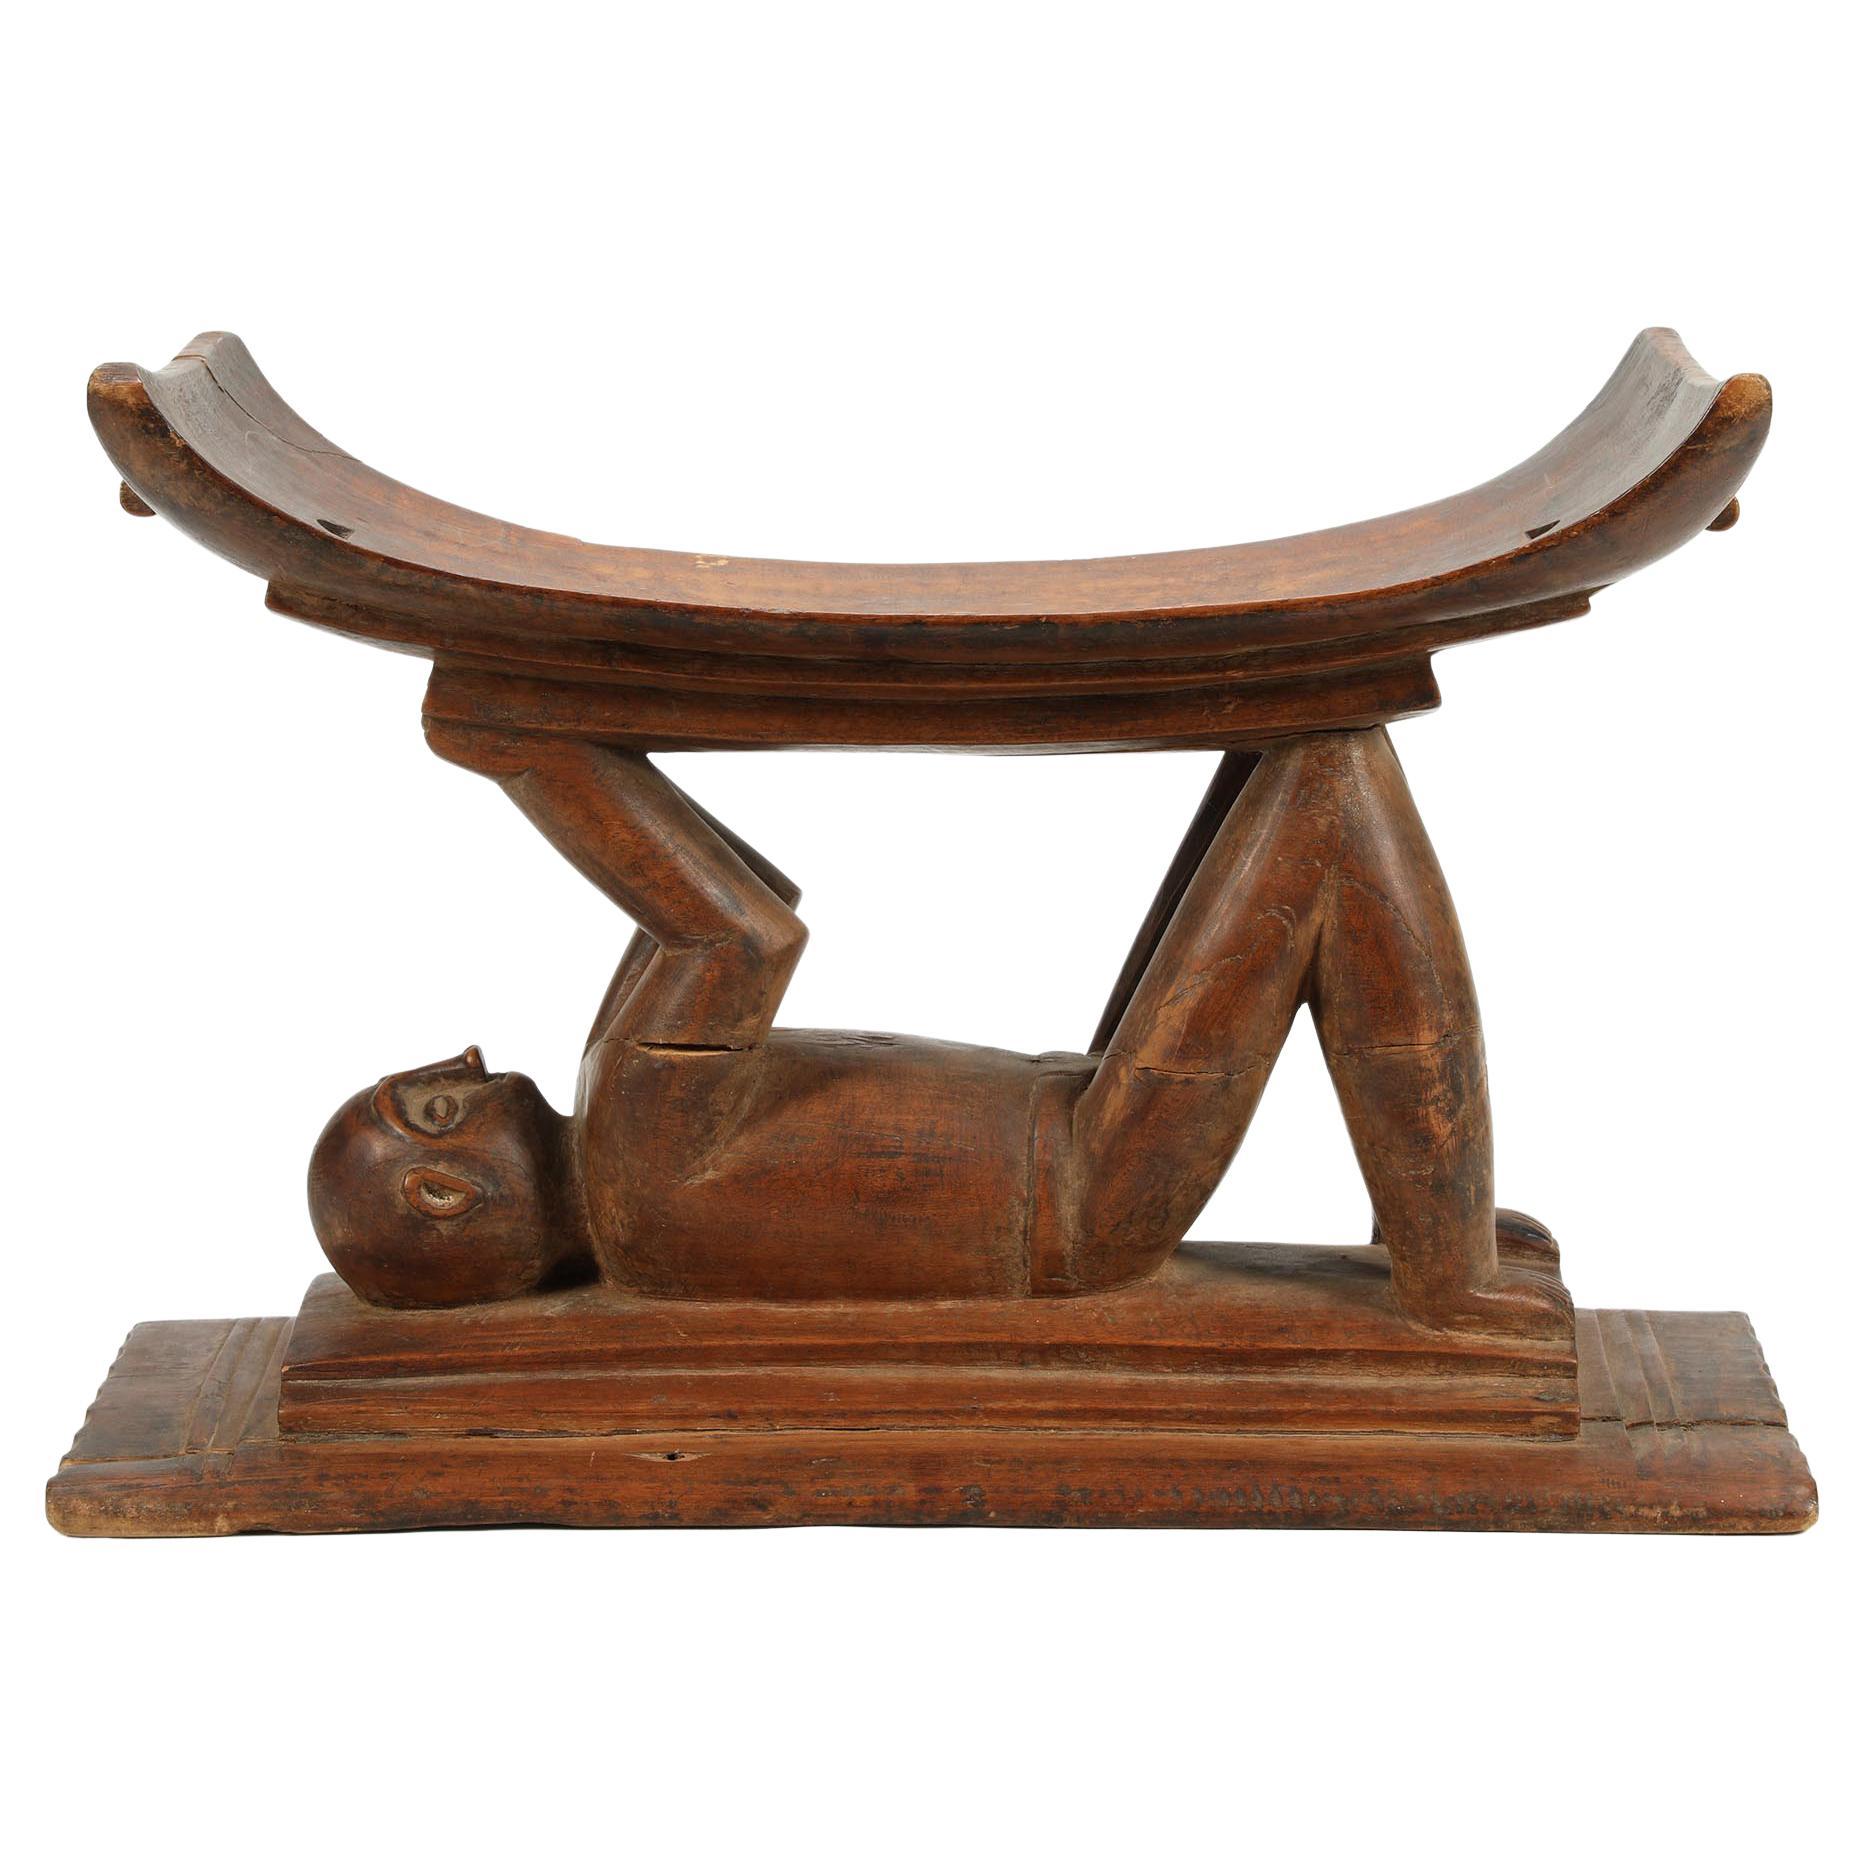 Early Wood Ashanti Stool with Reclining Figure Supporting Top, Mid 20th Century